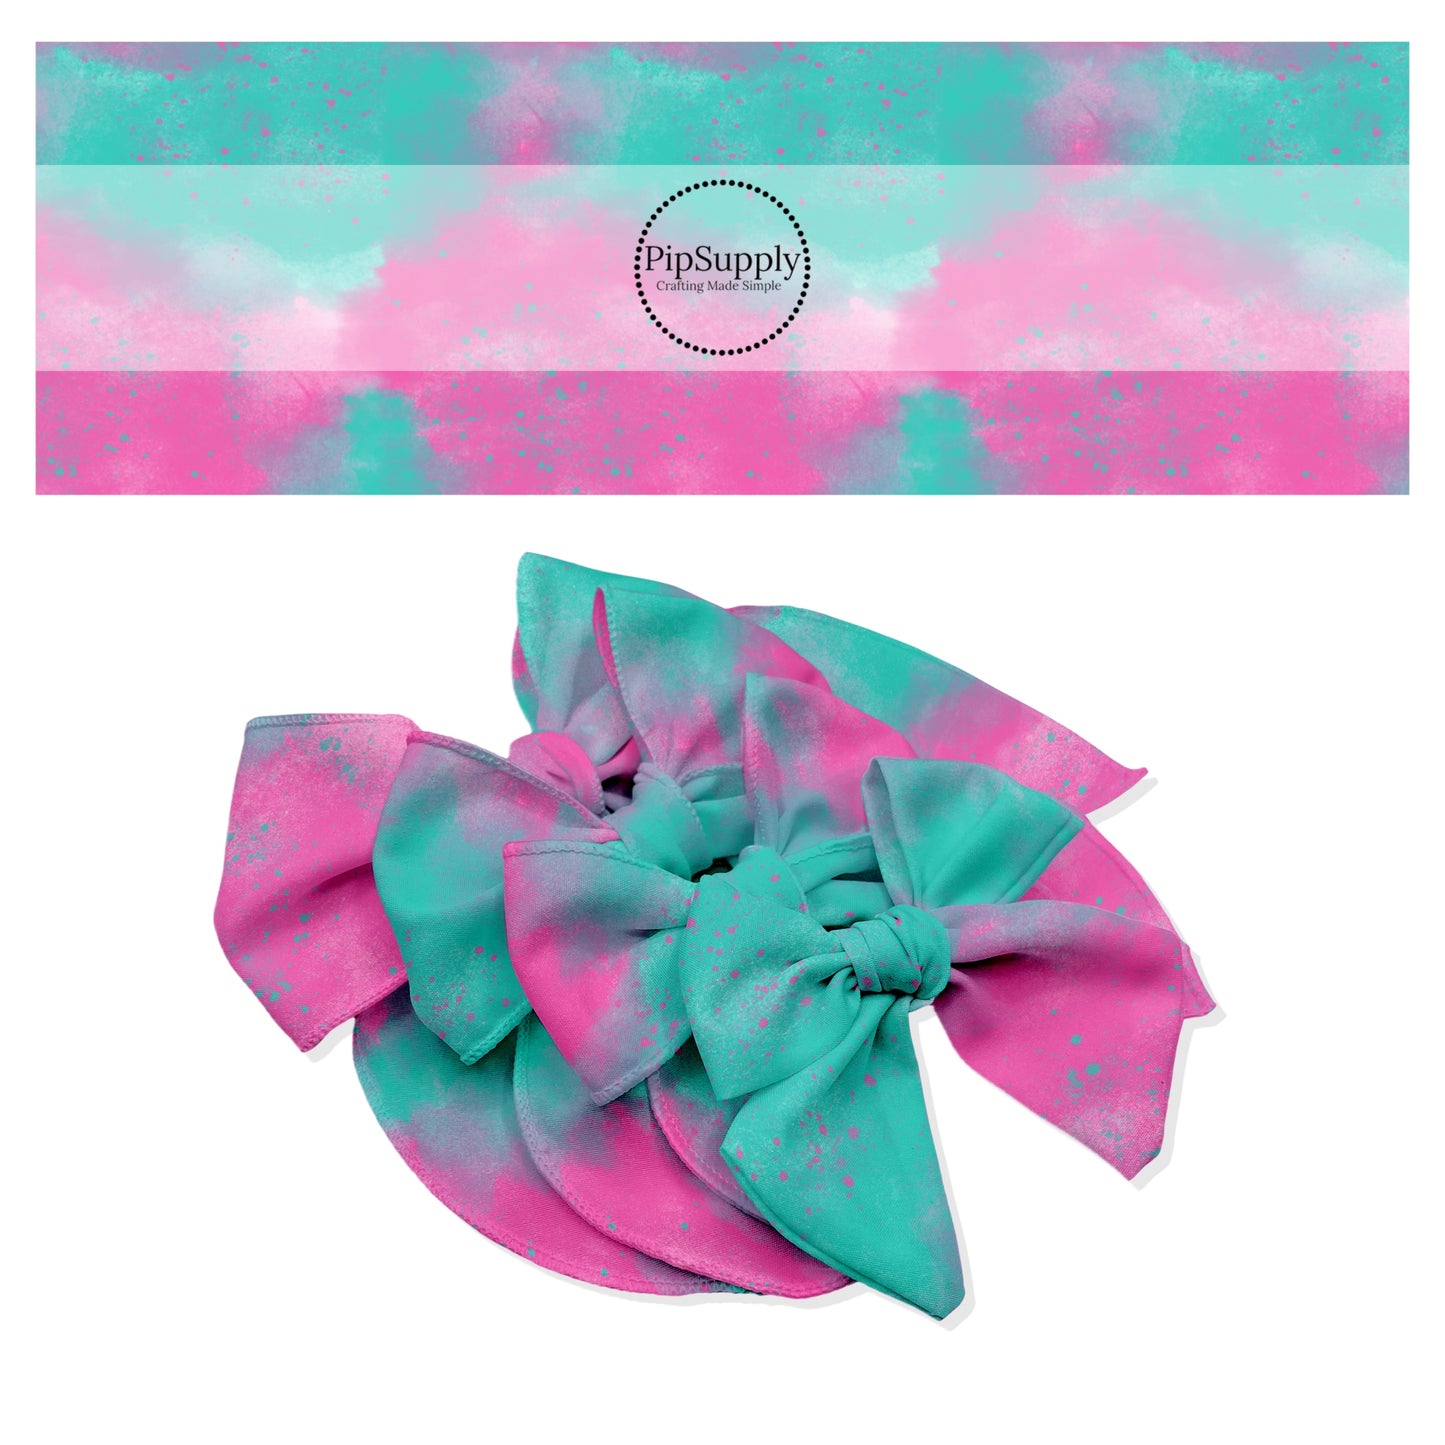 Paint splatter dots on pink and teal tie dye bow strips